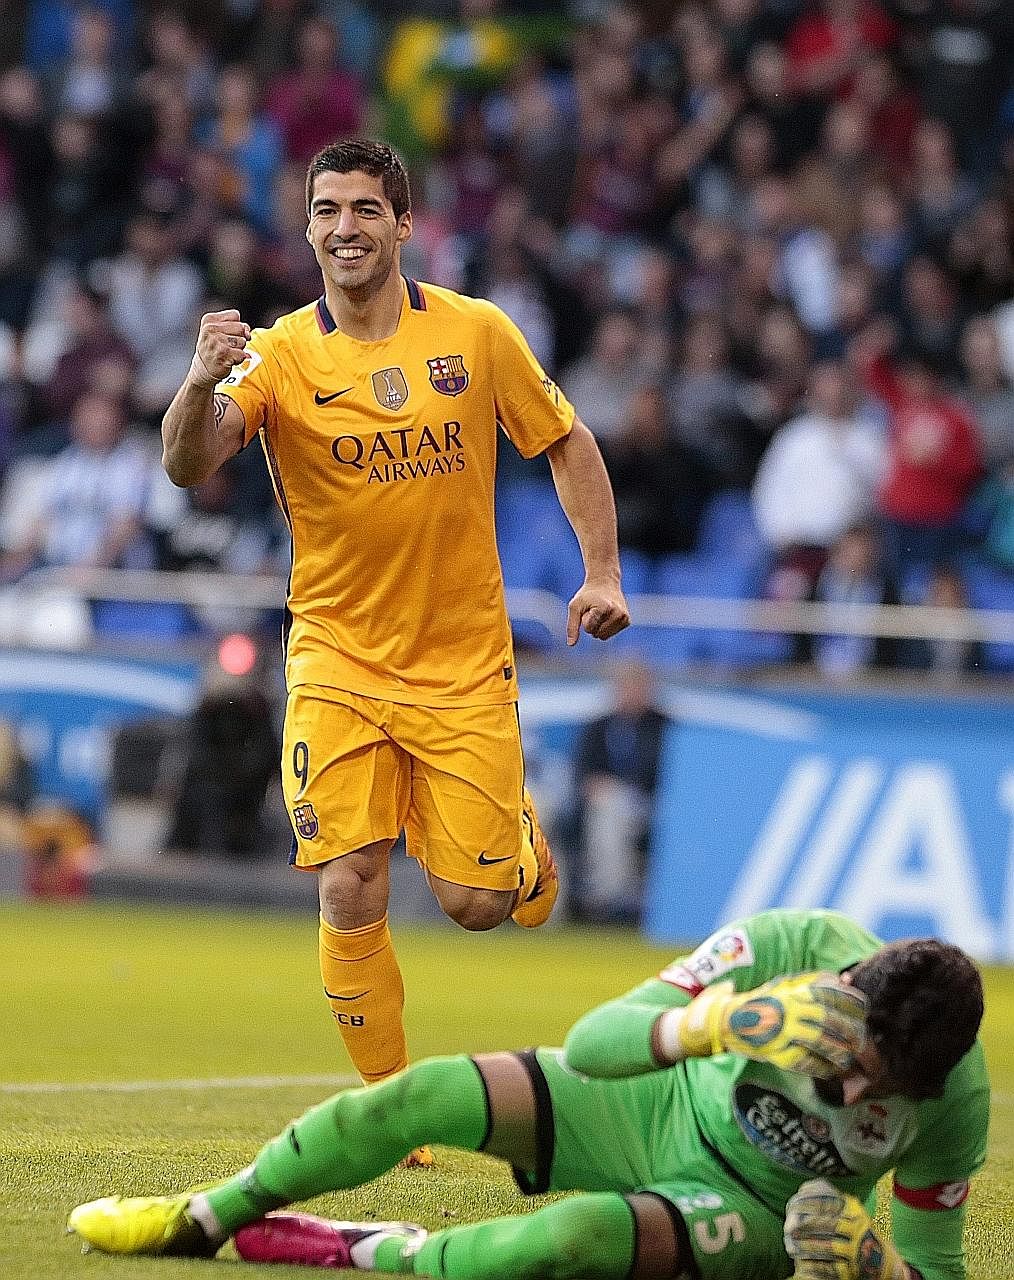 Luis Suarez celebrates completing his hat-trick against Athletic Bilbao. He later added another goal to take his season's tally to 30, clawing within one of Cristiano Ronaldo in the Pichichi standings.